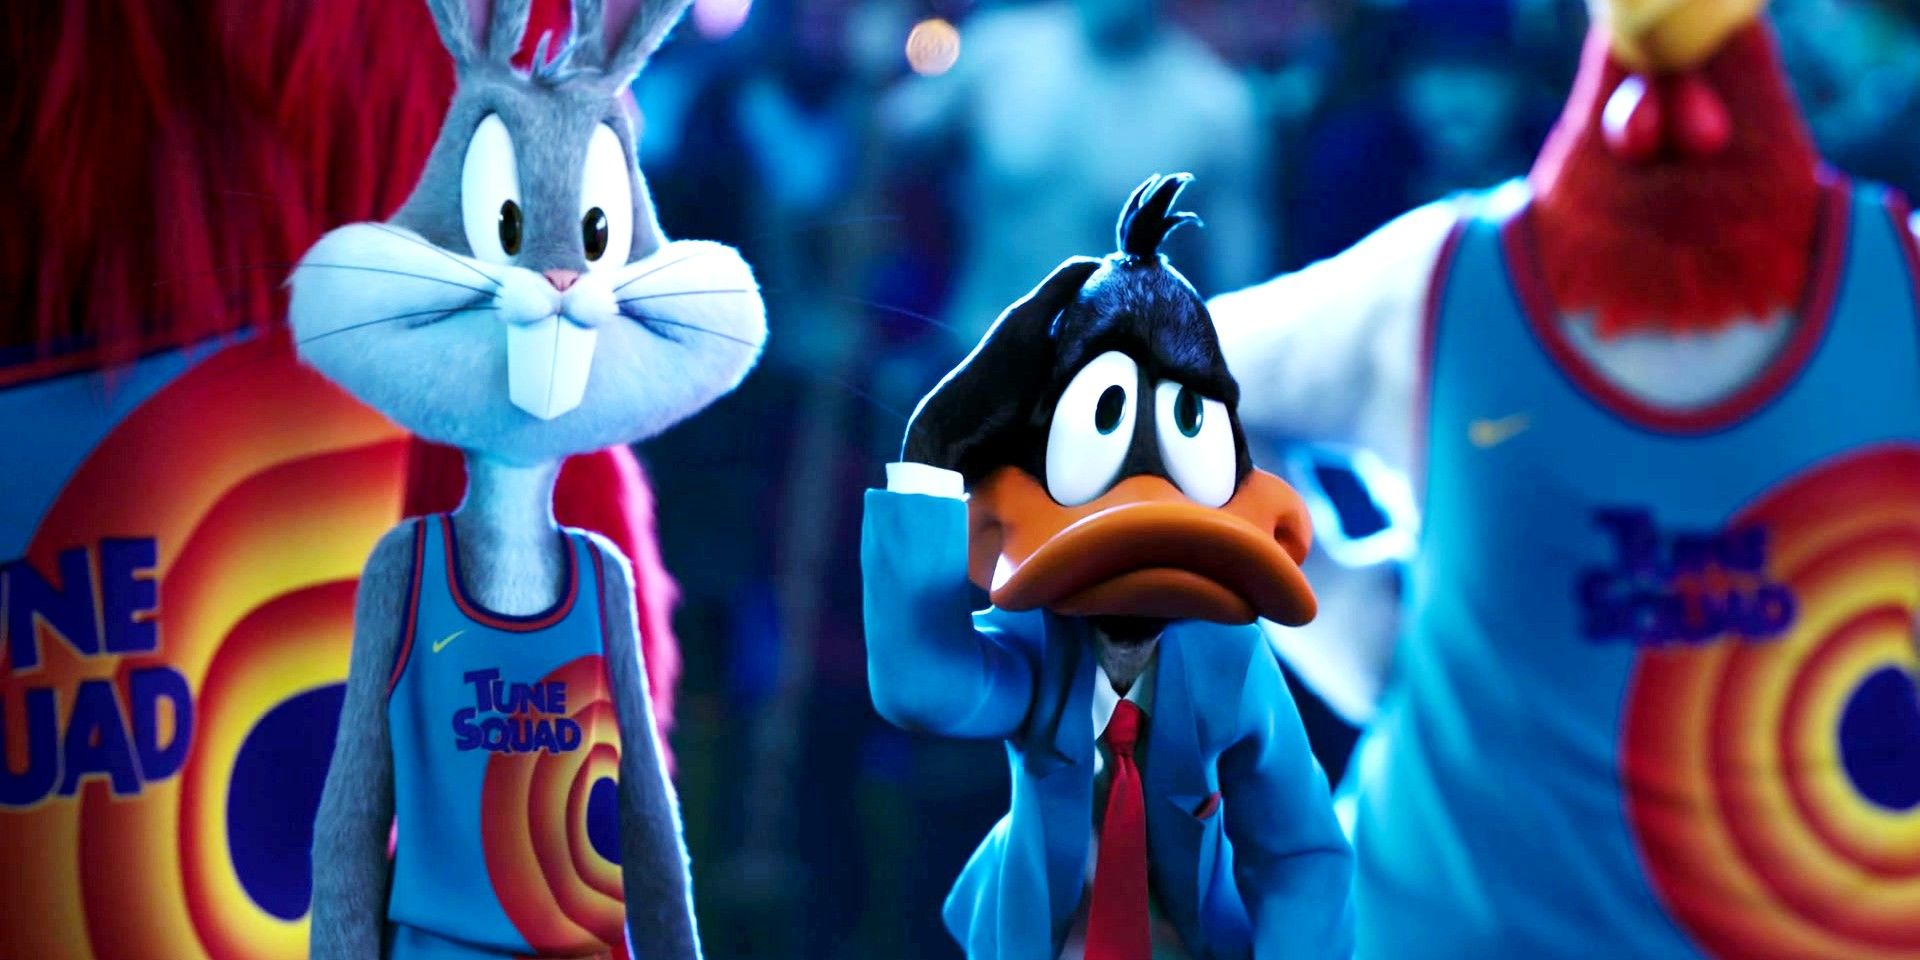 Bugs Bunny and Daffy Duck in their basketball uniforms in Space Jam A New Legacy